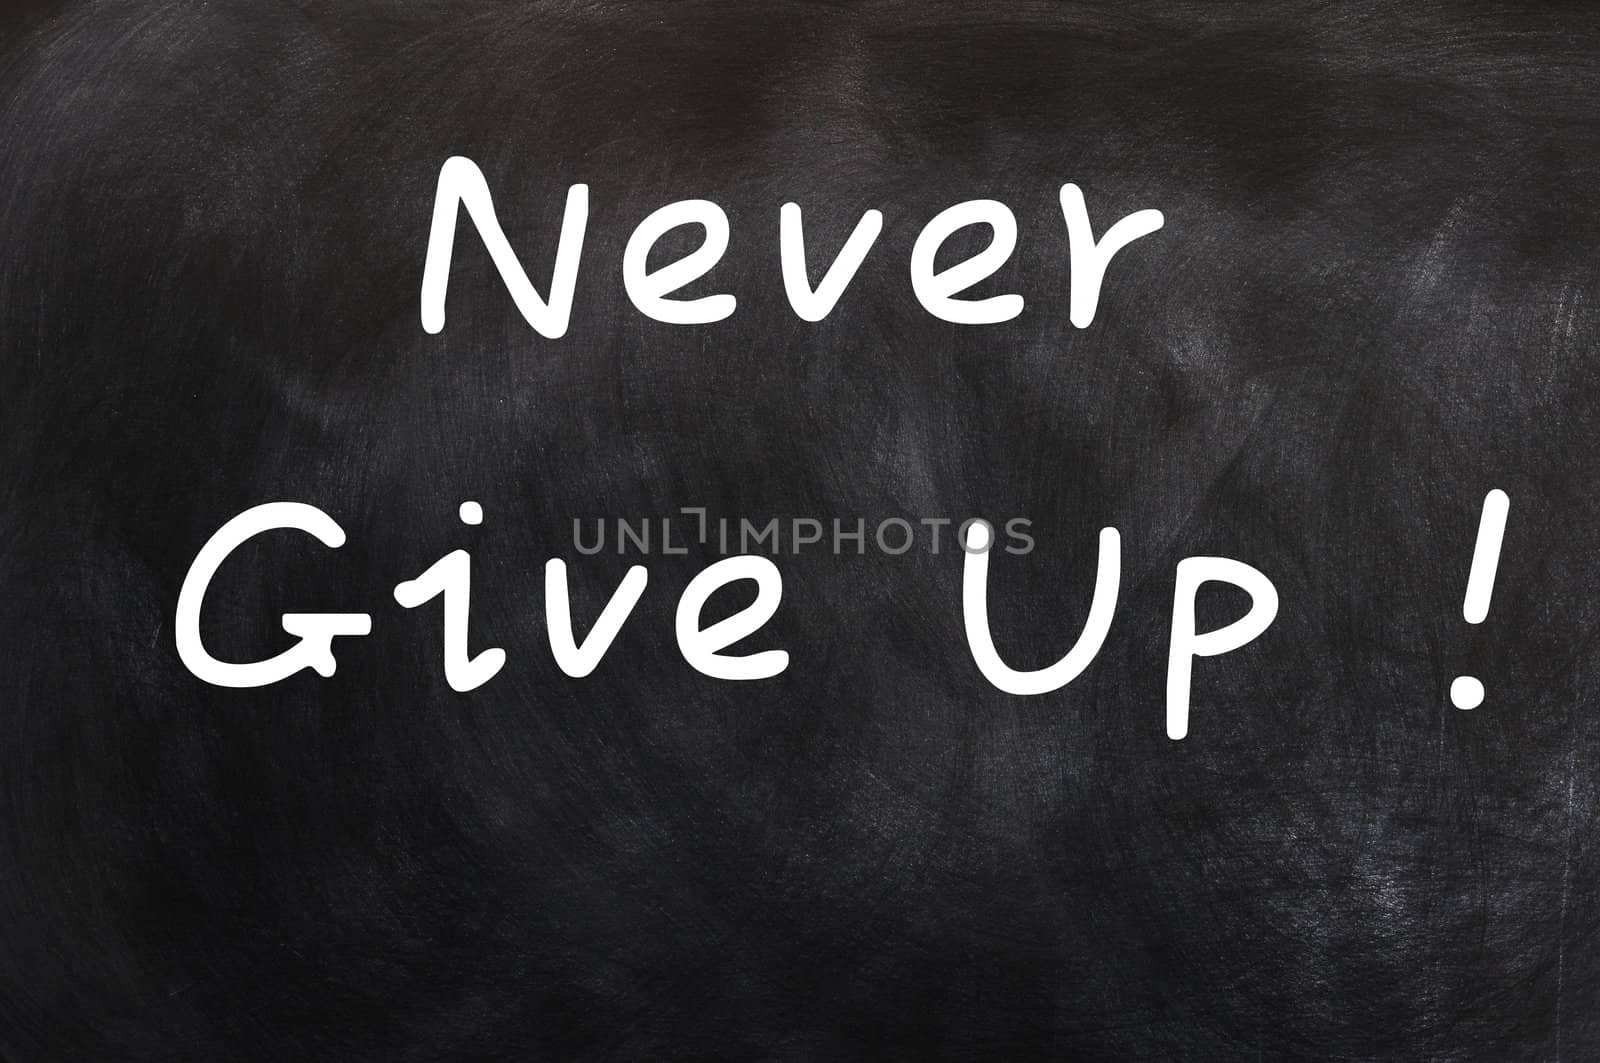 Never give up by bbbar